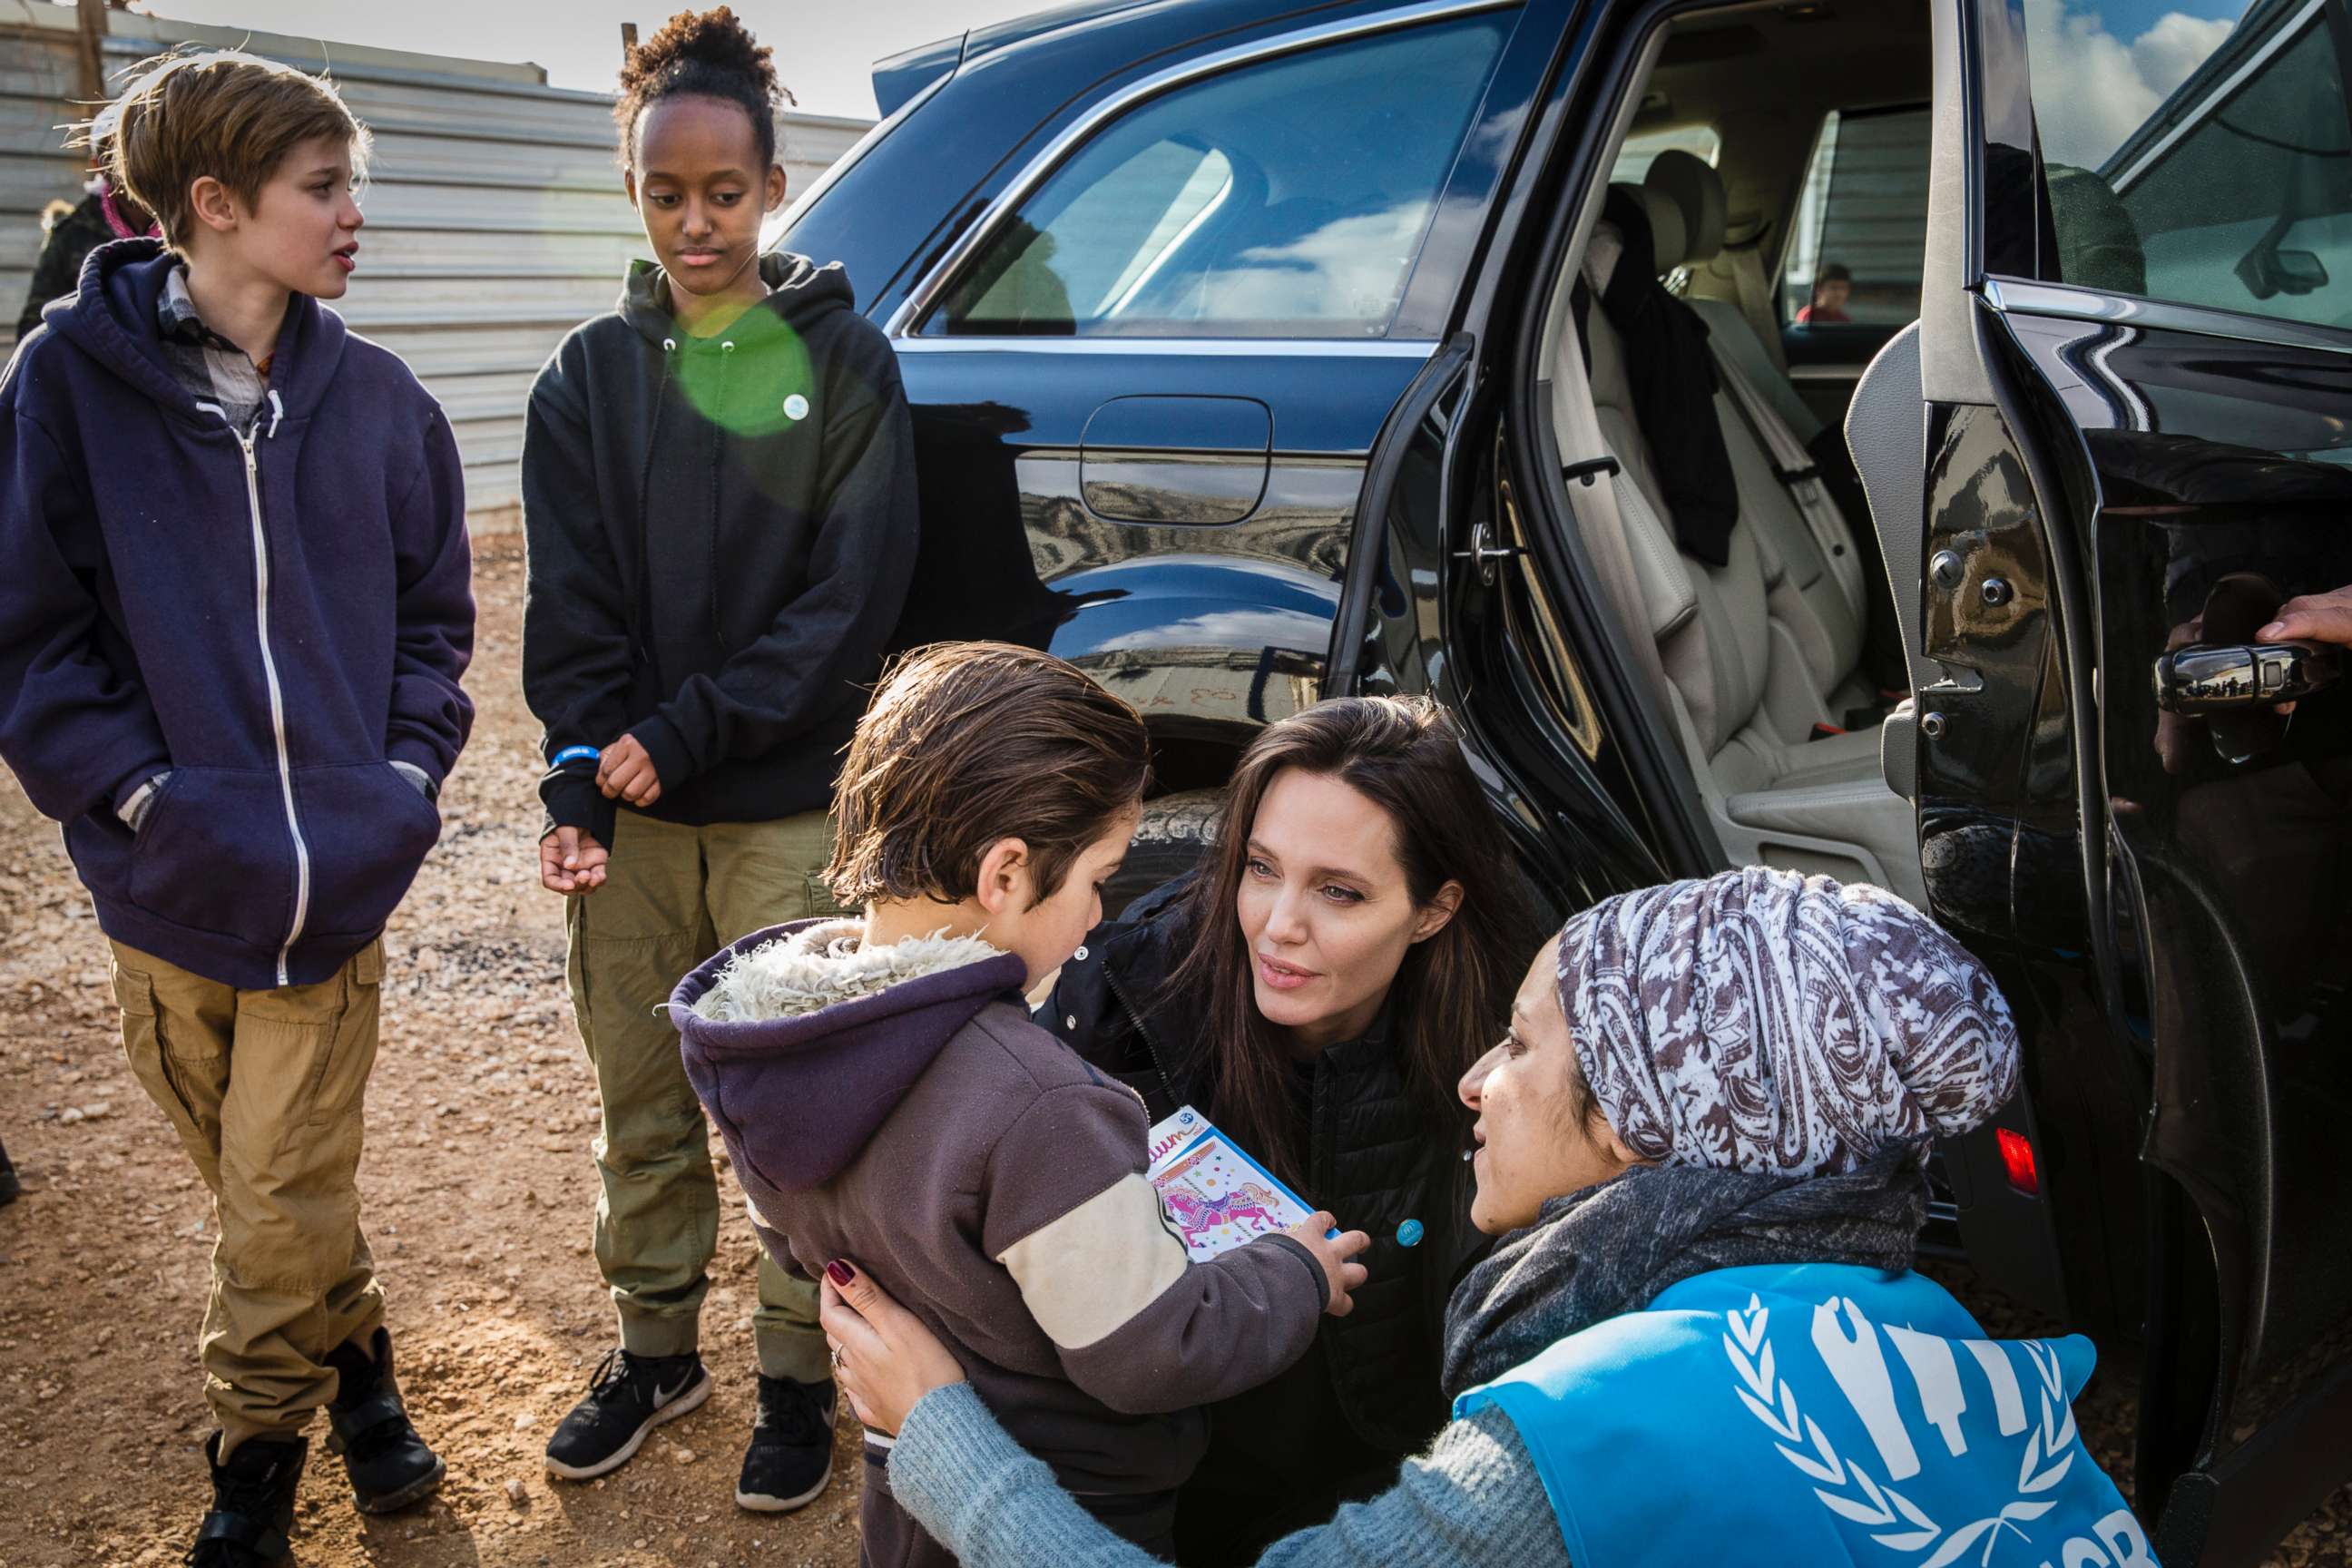 PHOTO: Special envoy Angelina Jolie accompanied on the trip by daughters Shiloh, and Zahara, speak with a young Syrian refugee boy outside his home, Jan. 28, 2018, in Zaatari refugee camp, Jordan. 